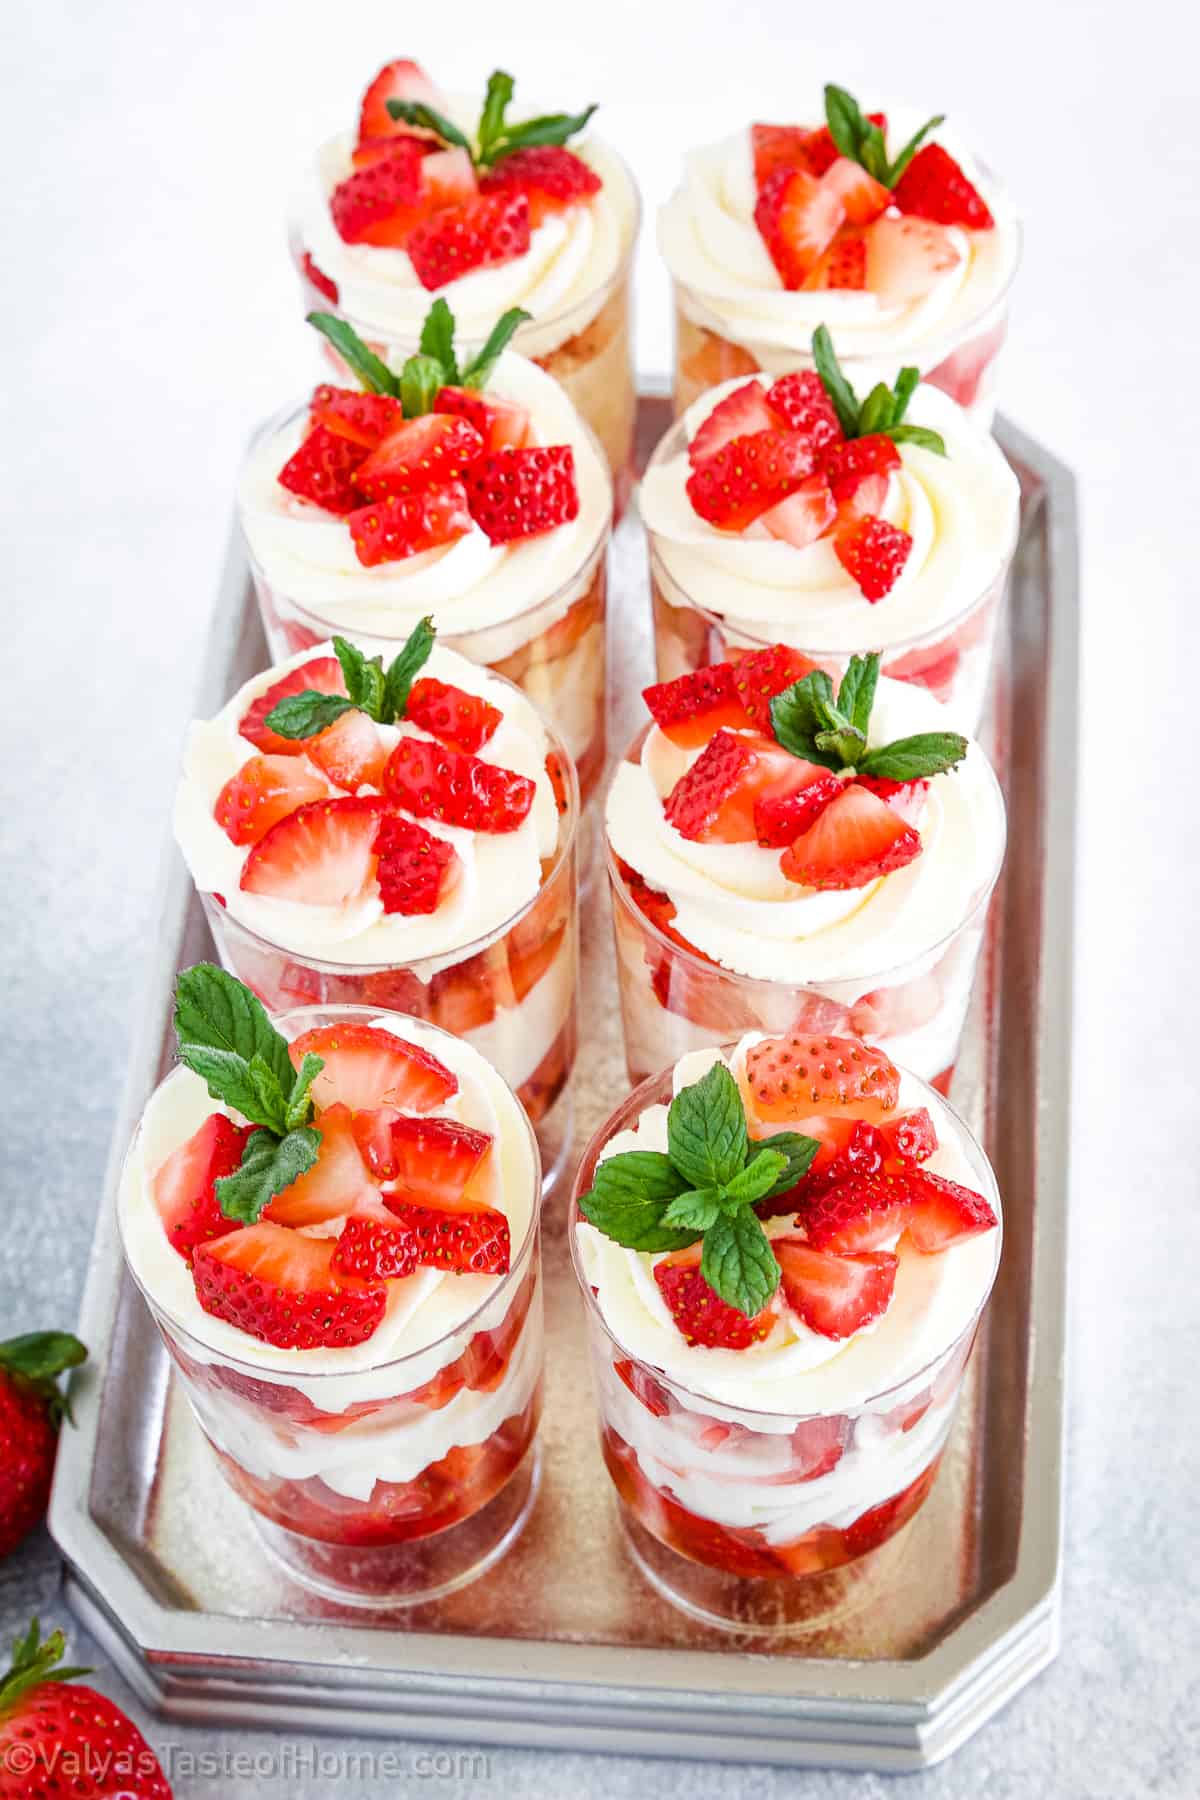 This classic dessert is a simple yet delicious combination of fresh, juicy strawberries and rich, whipped cream.